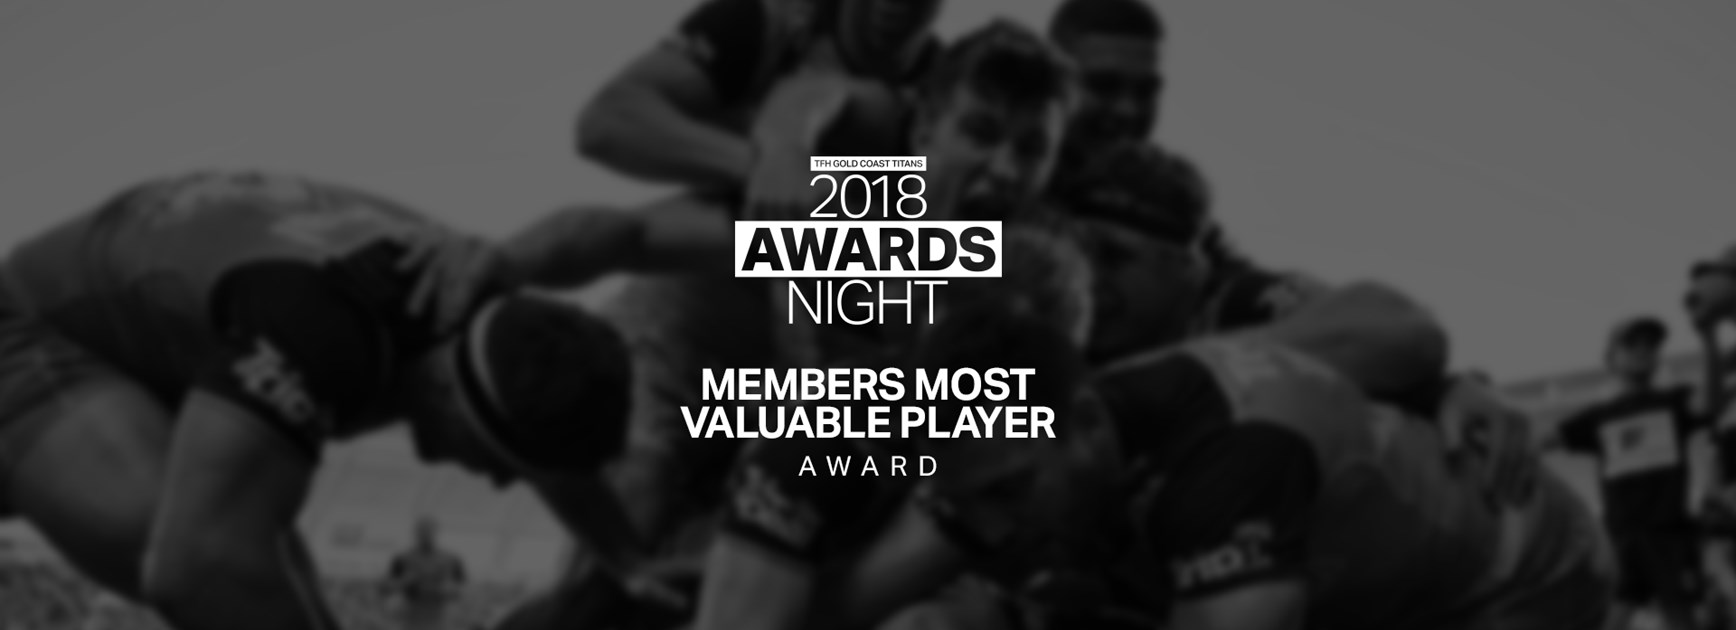 EXCLUSIVE: Members Most Valuable Player Award